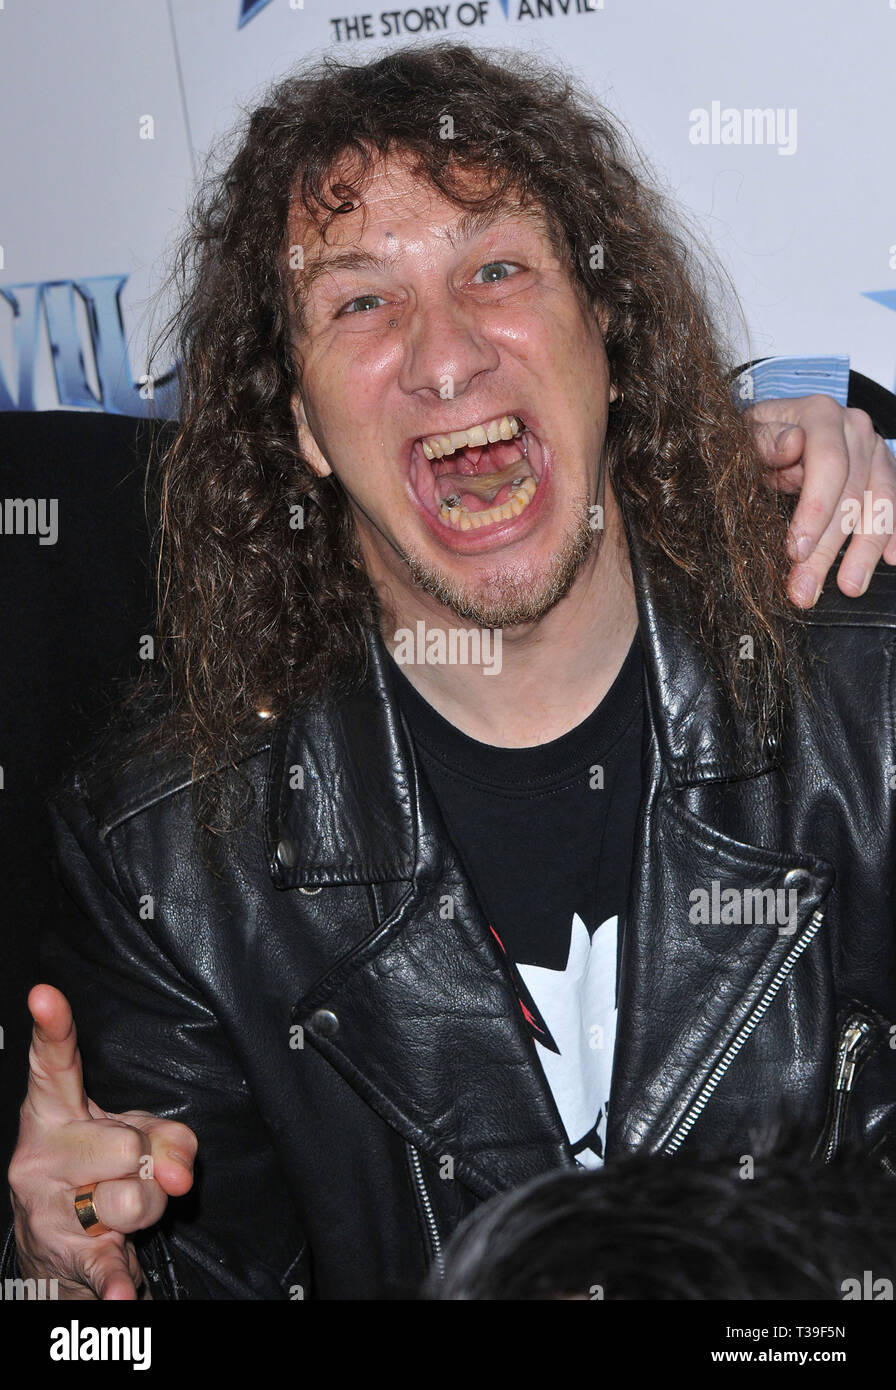 Steve ' Lips ' Kudlow  - Anvil - The Story Of Anvil Premiere at the Egyptian Theatre in Los Angeles.KudlowSteveLIPS 34 Red Carpet Event, Vertical, USA, Film Industry, Celebrities,  Photography, Bestof, Arts Culture and Entertainment, Topix Celebrities fashion /  Vertical, Best of, Event in Hollywood Life - California,  Red Carpet and backstage, USA, Film Industry, Celebrities,  movie celebrities, TV celebrities, Music celebrities, Photography, Bestof, Arts Culture and Entertainment,  Topix, headshot, vertical, one person,, from the year , 2009, inquiry tsuni@Gamma-USA.com Stock Photo